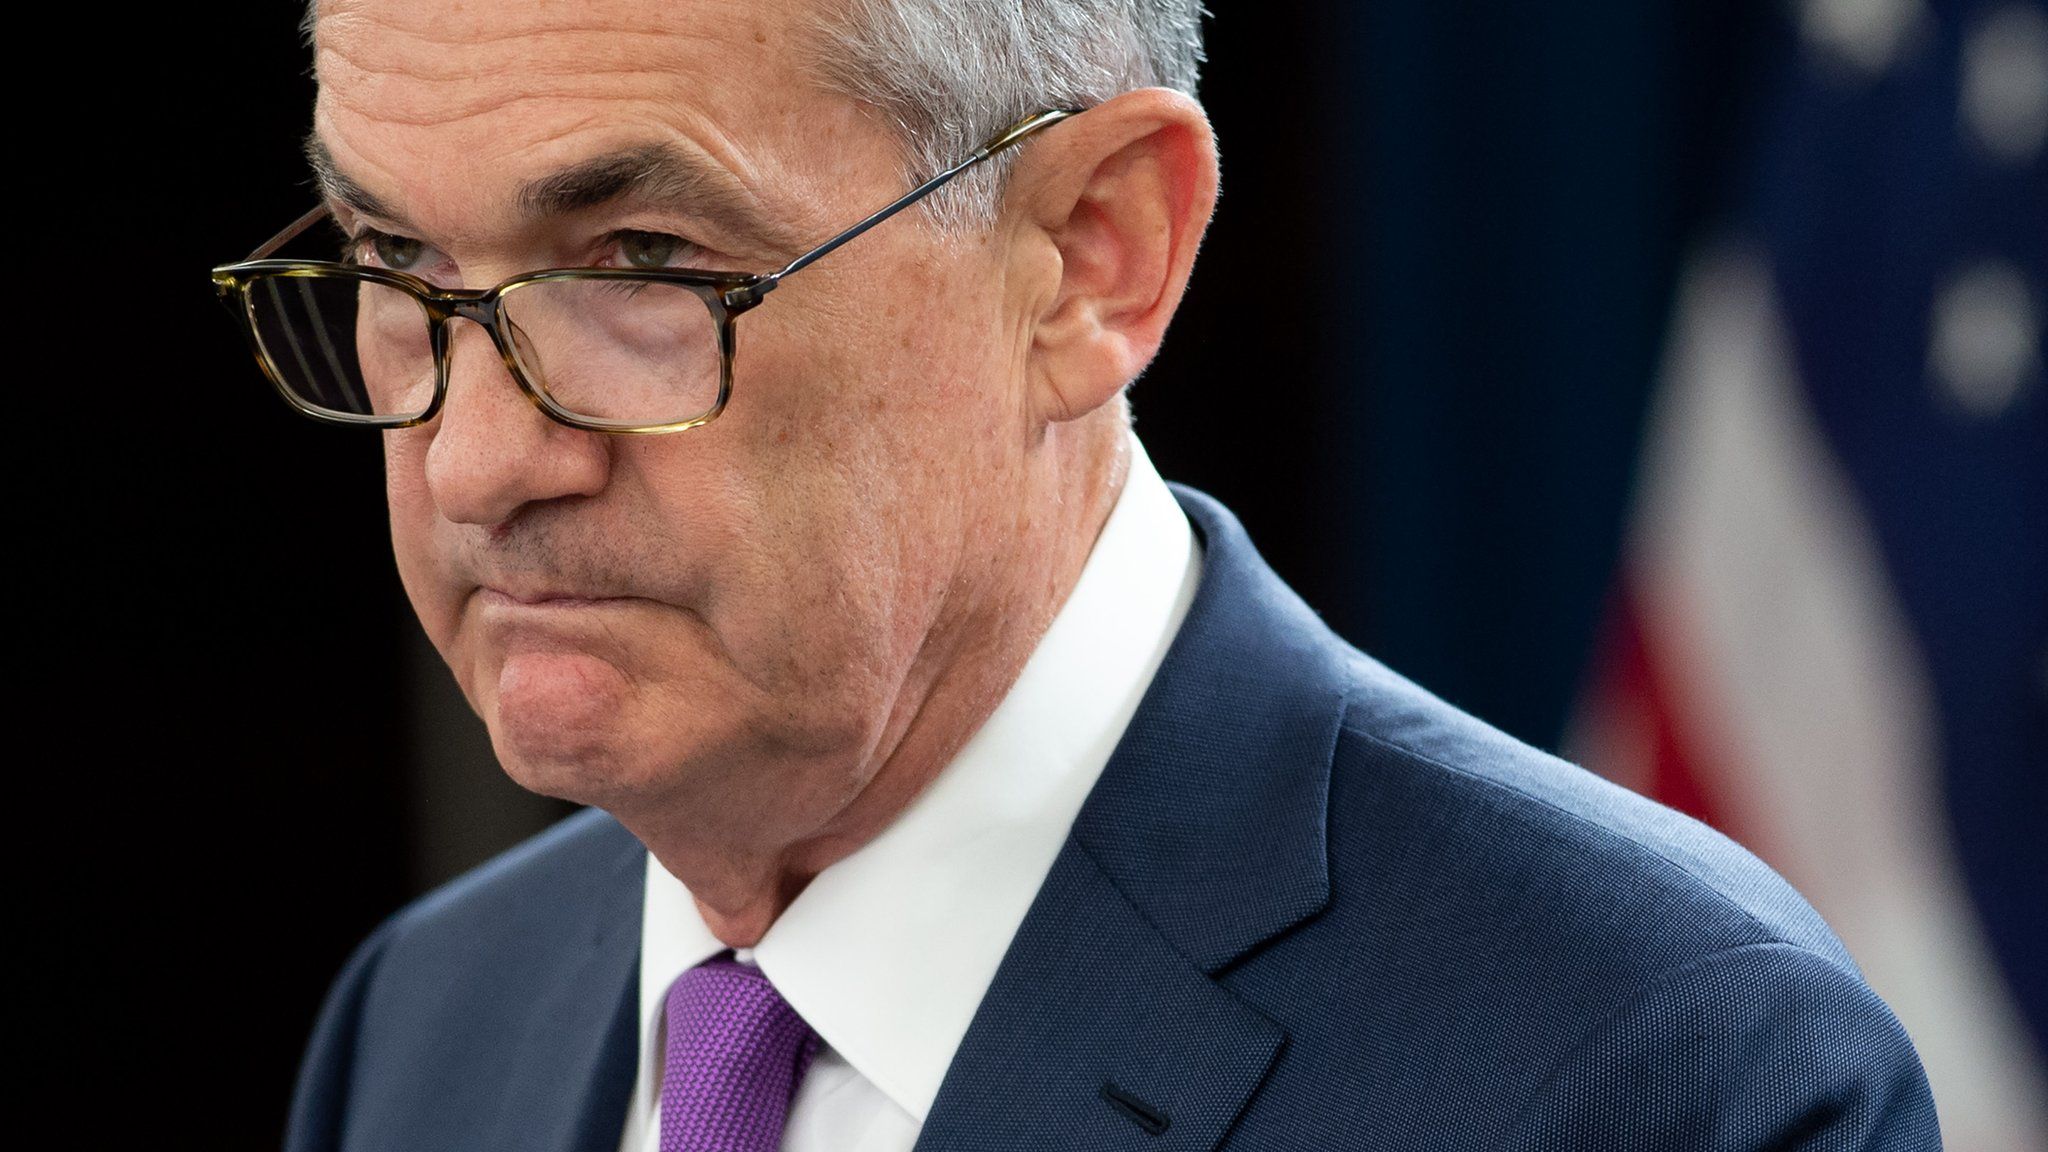 In this file photo taken on September 26, 2018 Federal Reserve Board Chairman Jerome Powell speaks during a press conference in Washington, DC.